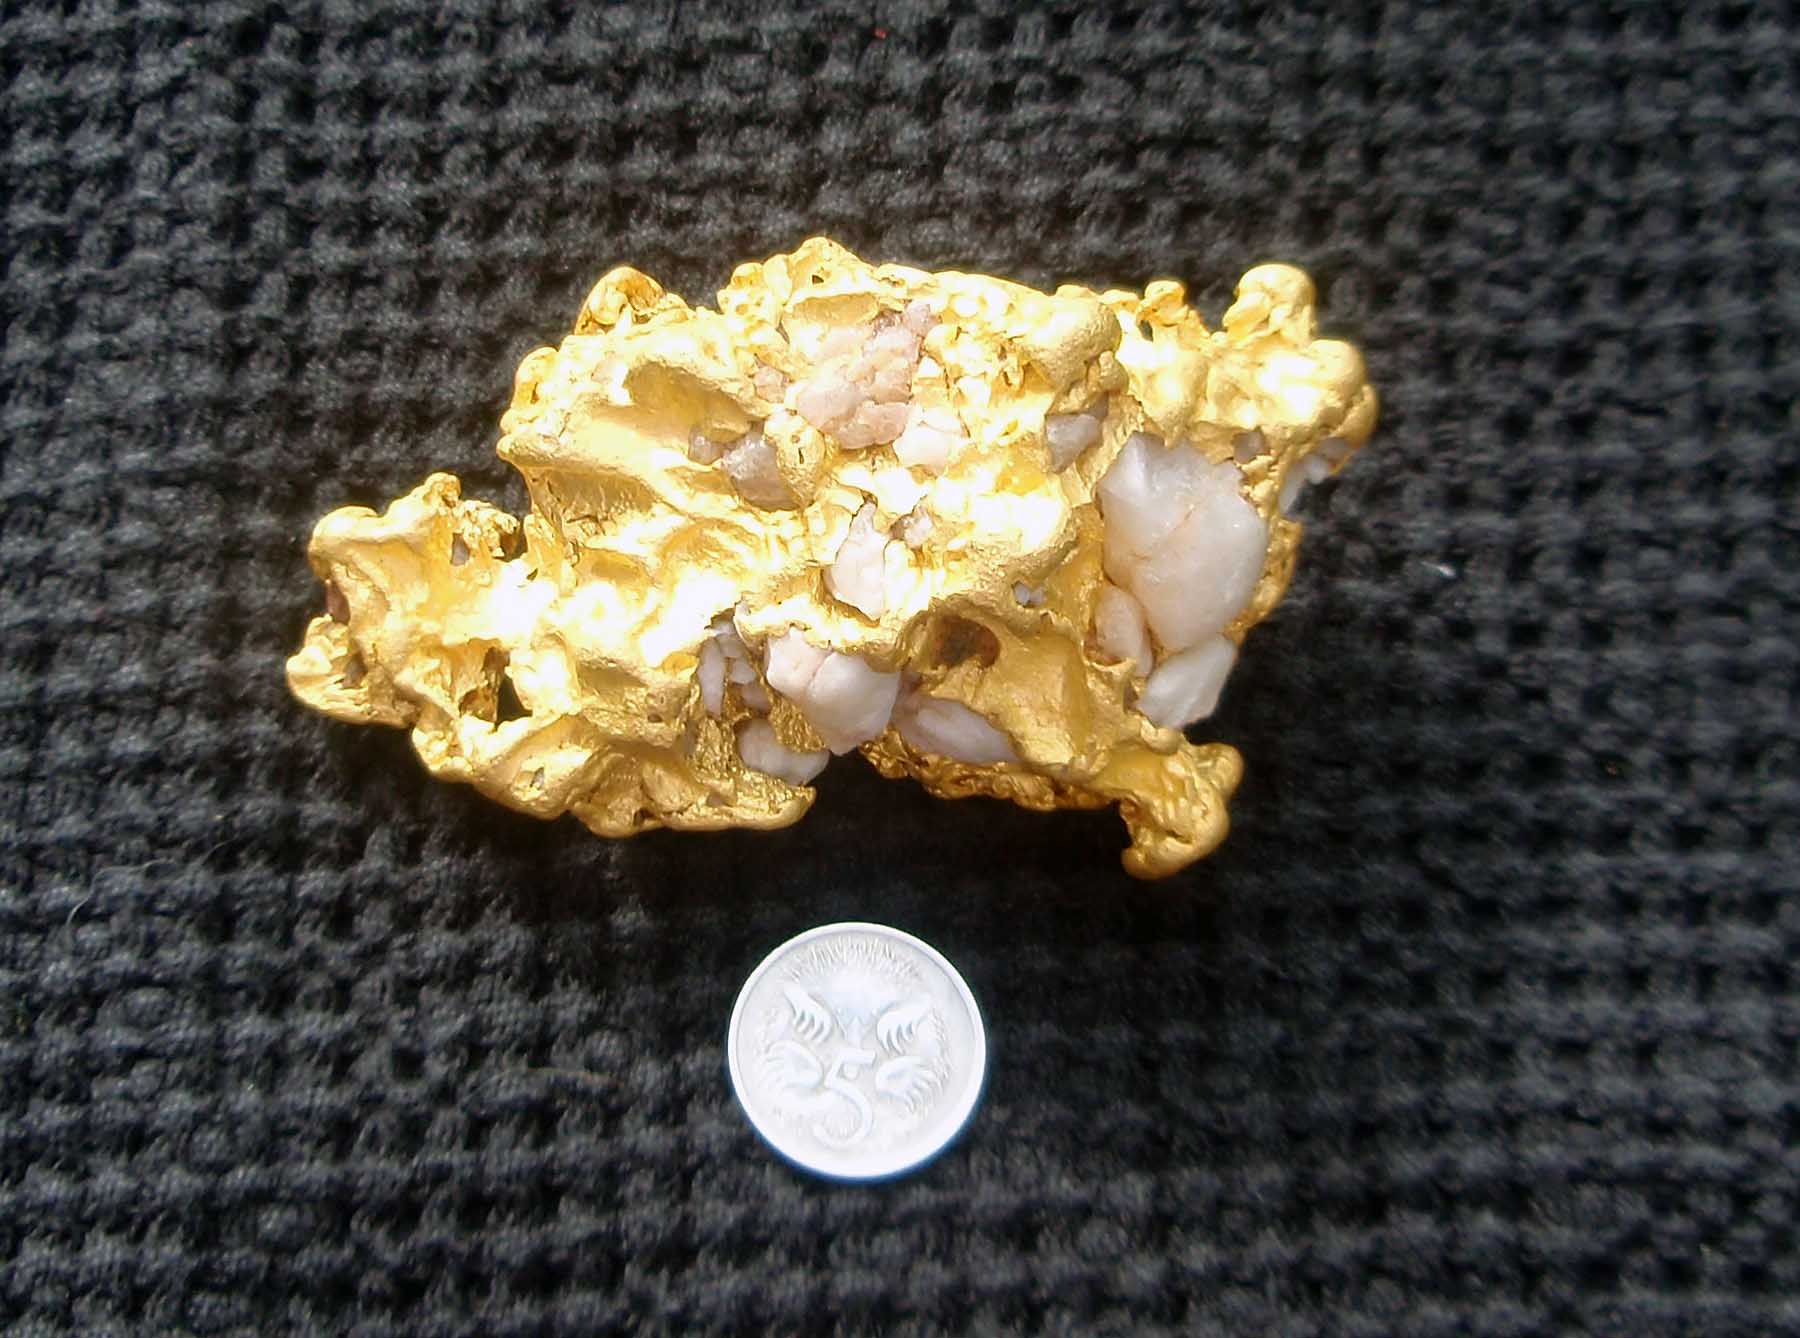 Koonenberry gold with attached “reef“ quartz